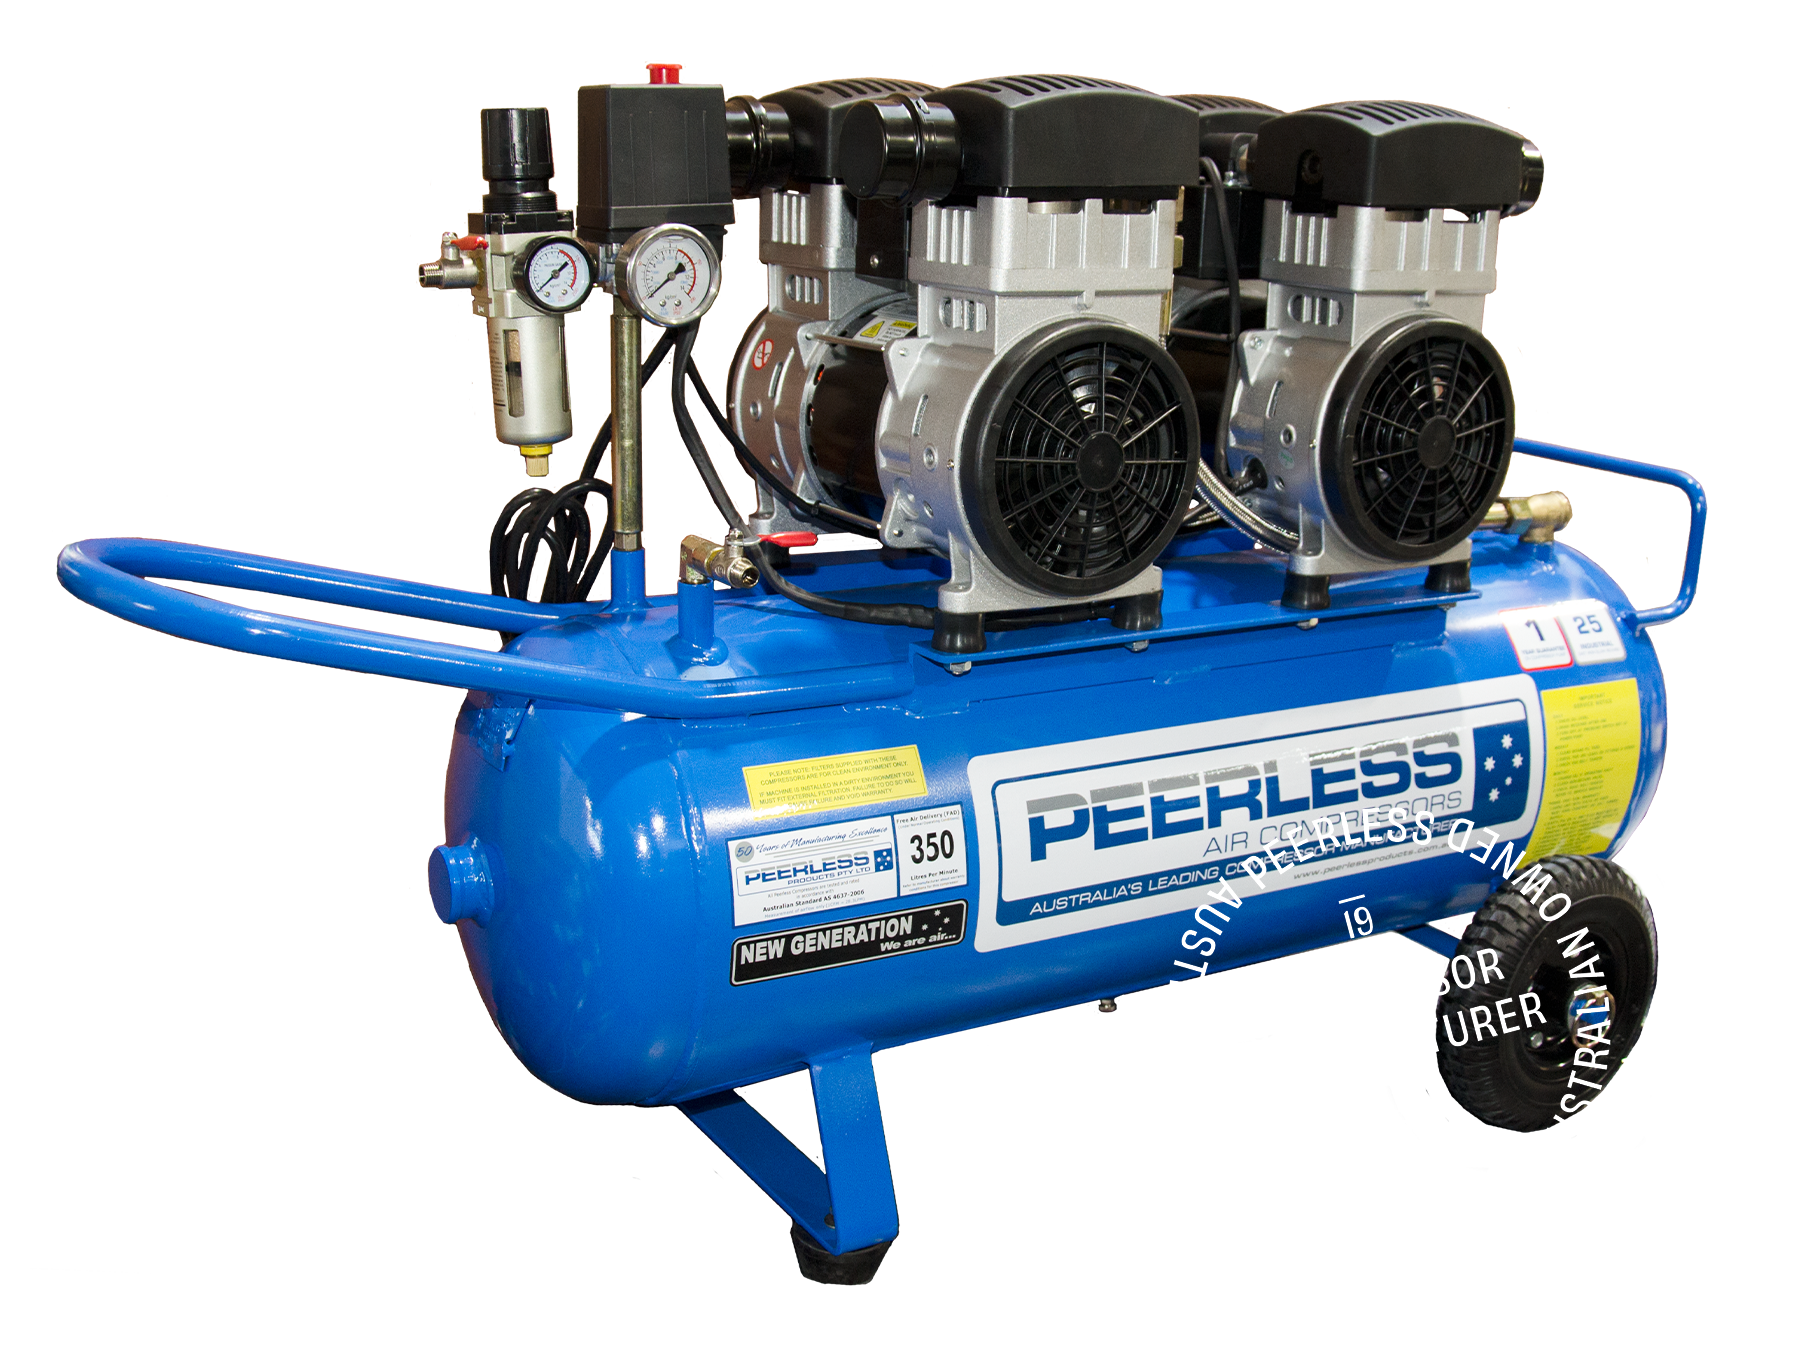 PO25 Single Phase Air Compressor: Oilless, Direct Drive, 10Amp, 15Amp, 4HP, 350LPM